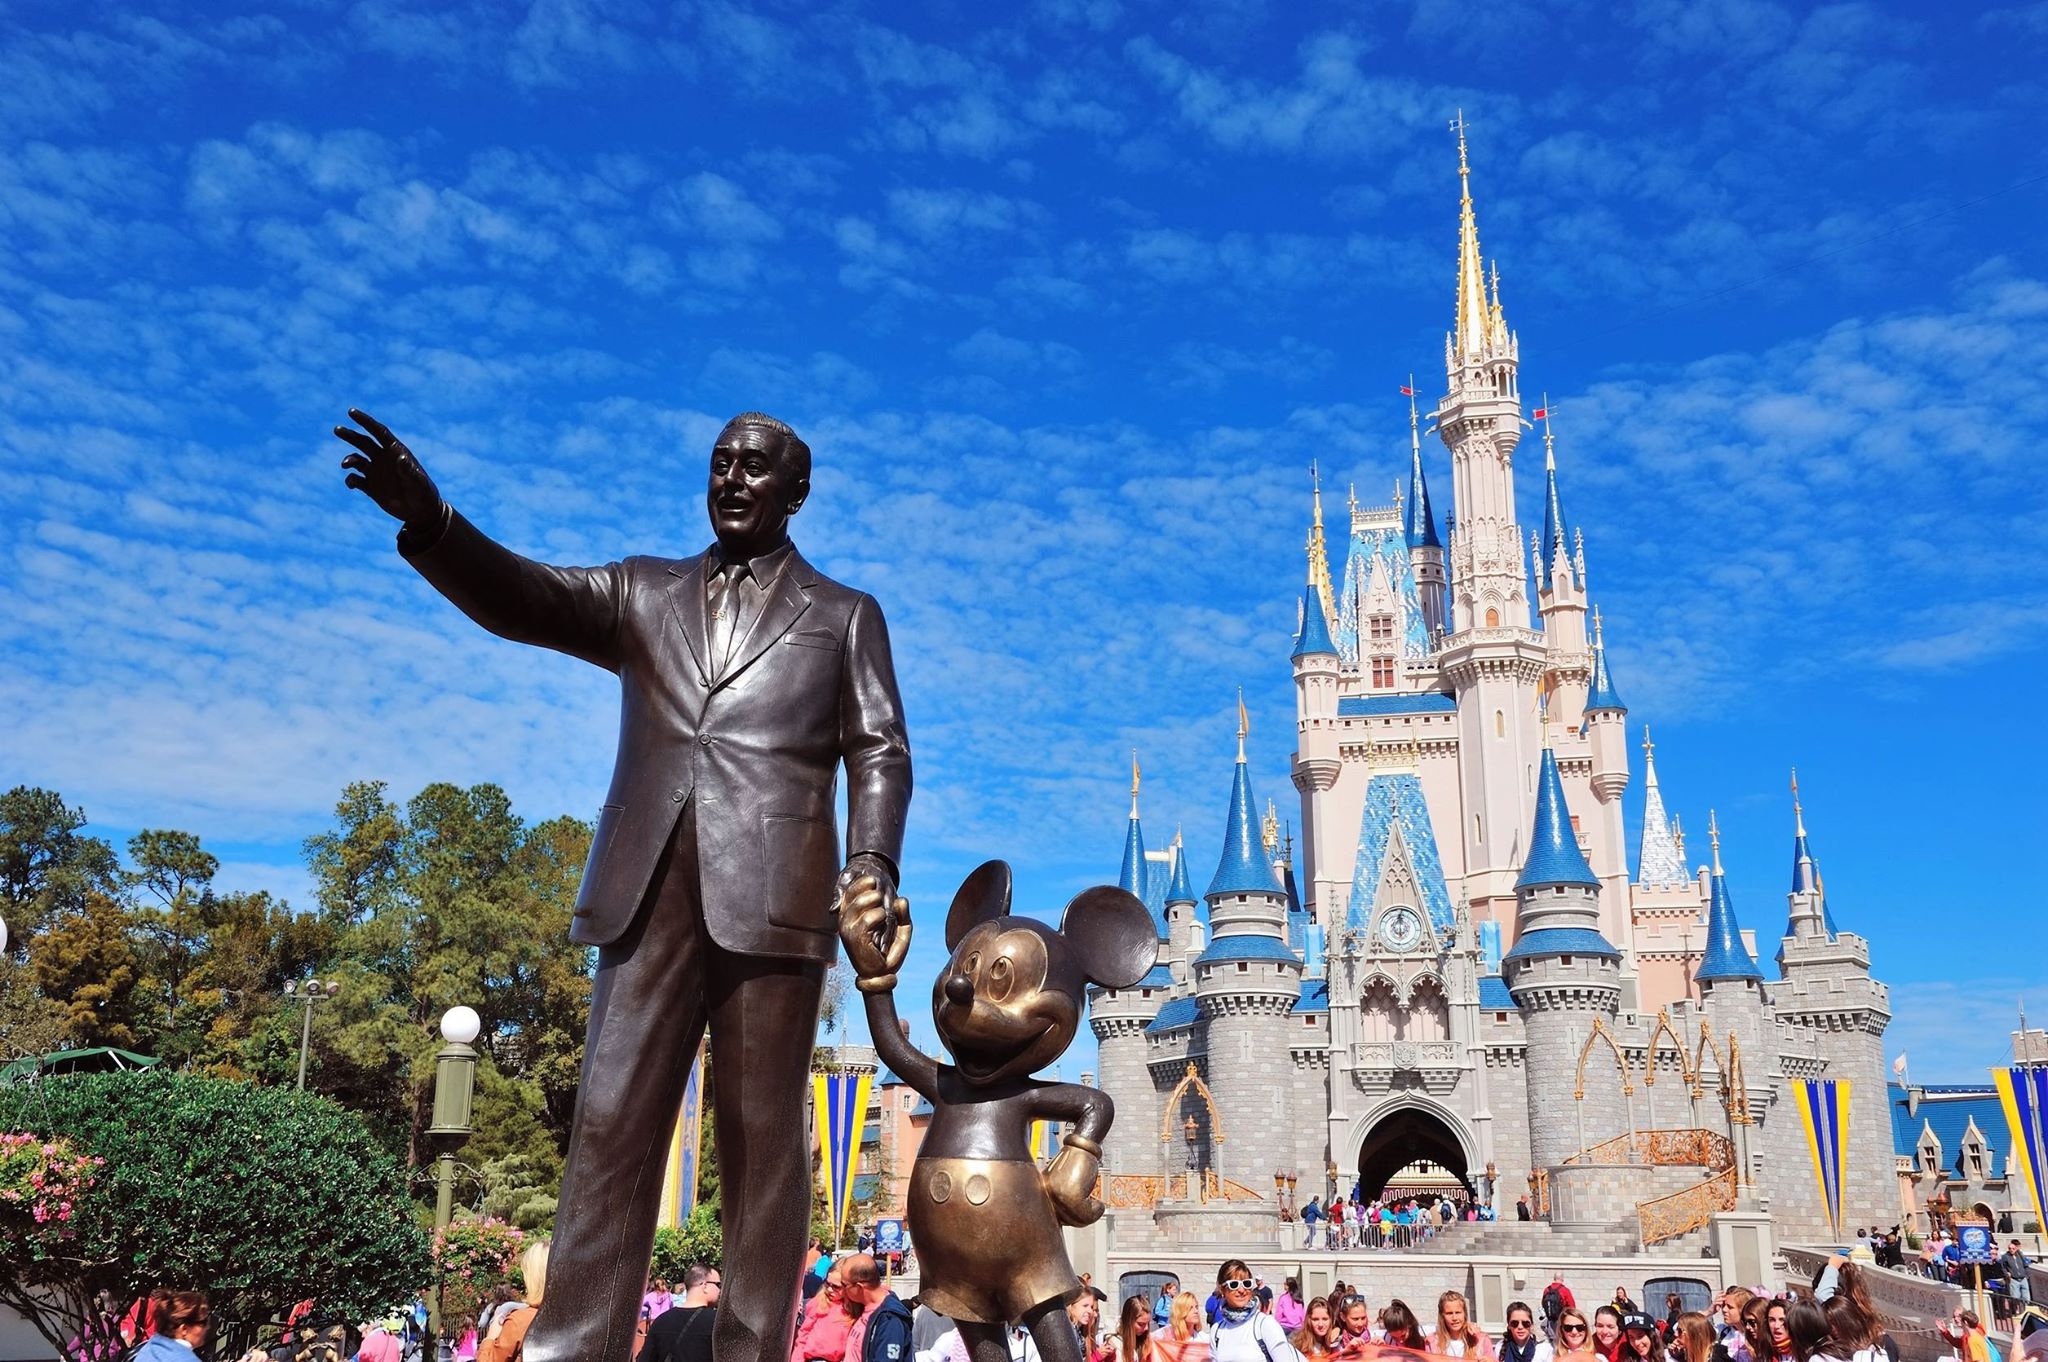 Disney World Resort has just updated information on Resort Reservations, Experiences, Transportation, Dining, and more